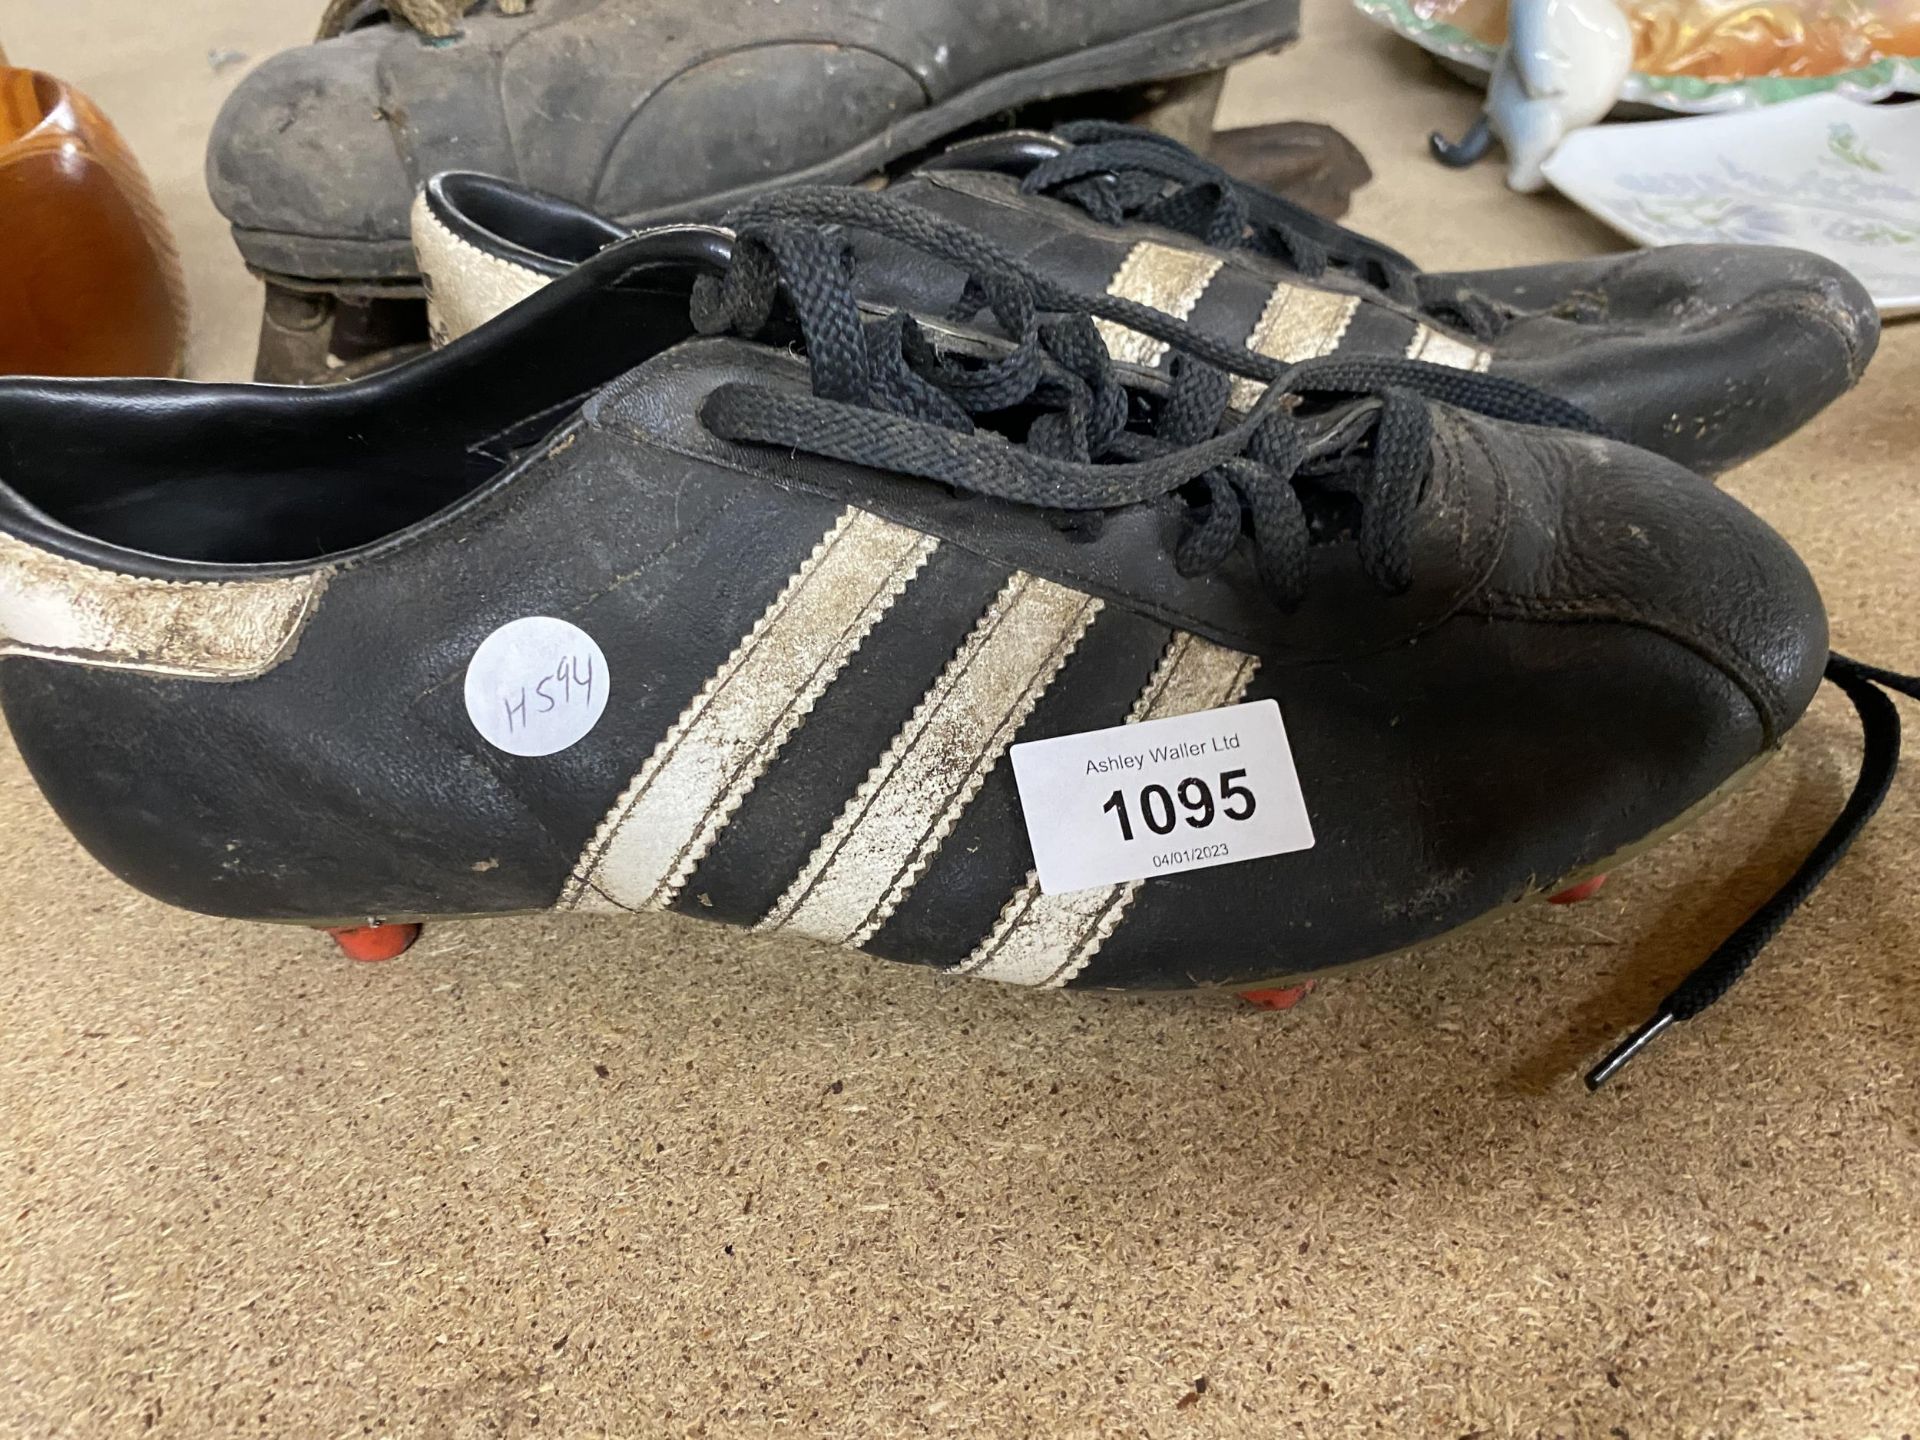 A VINTAGE PAIR OF ADIDAS FOOTBALL BOOTS AND ICE SKATES - Image 2 of 3